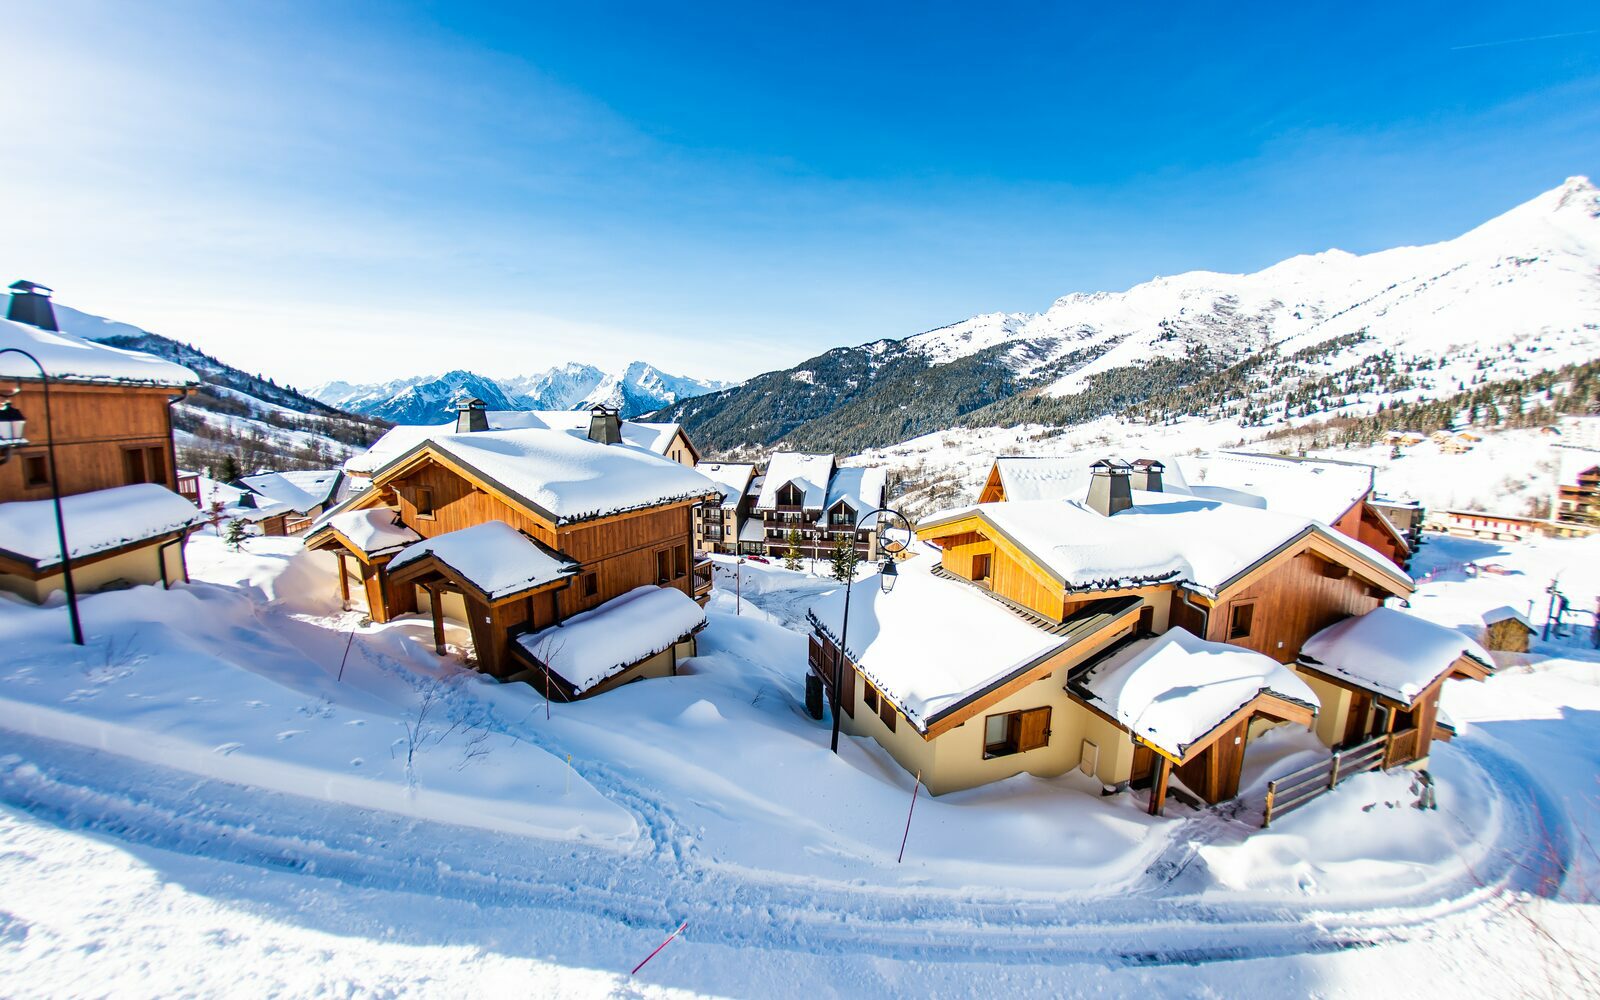 Chalet/flat on the pistes